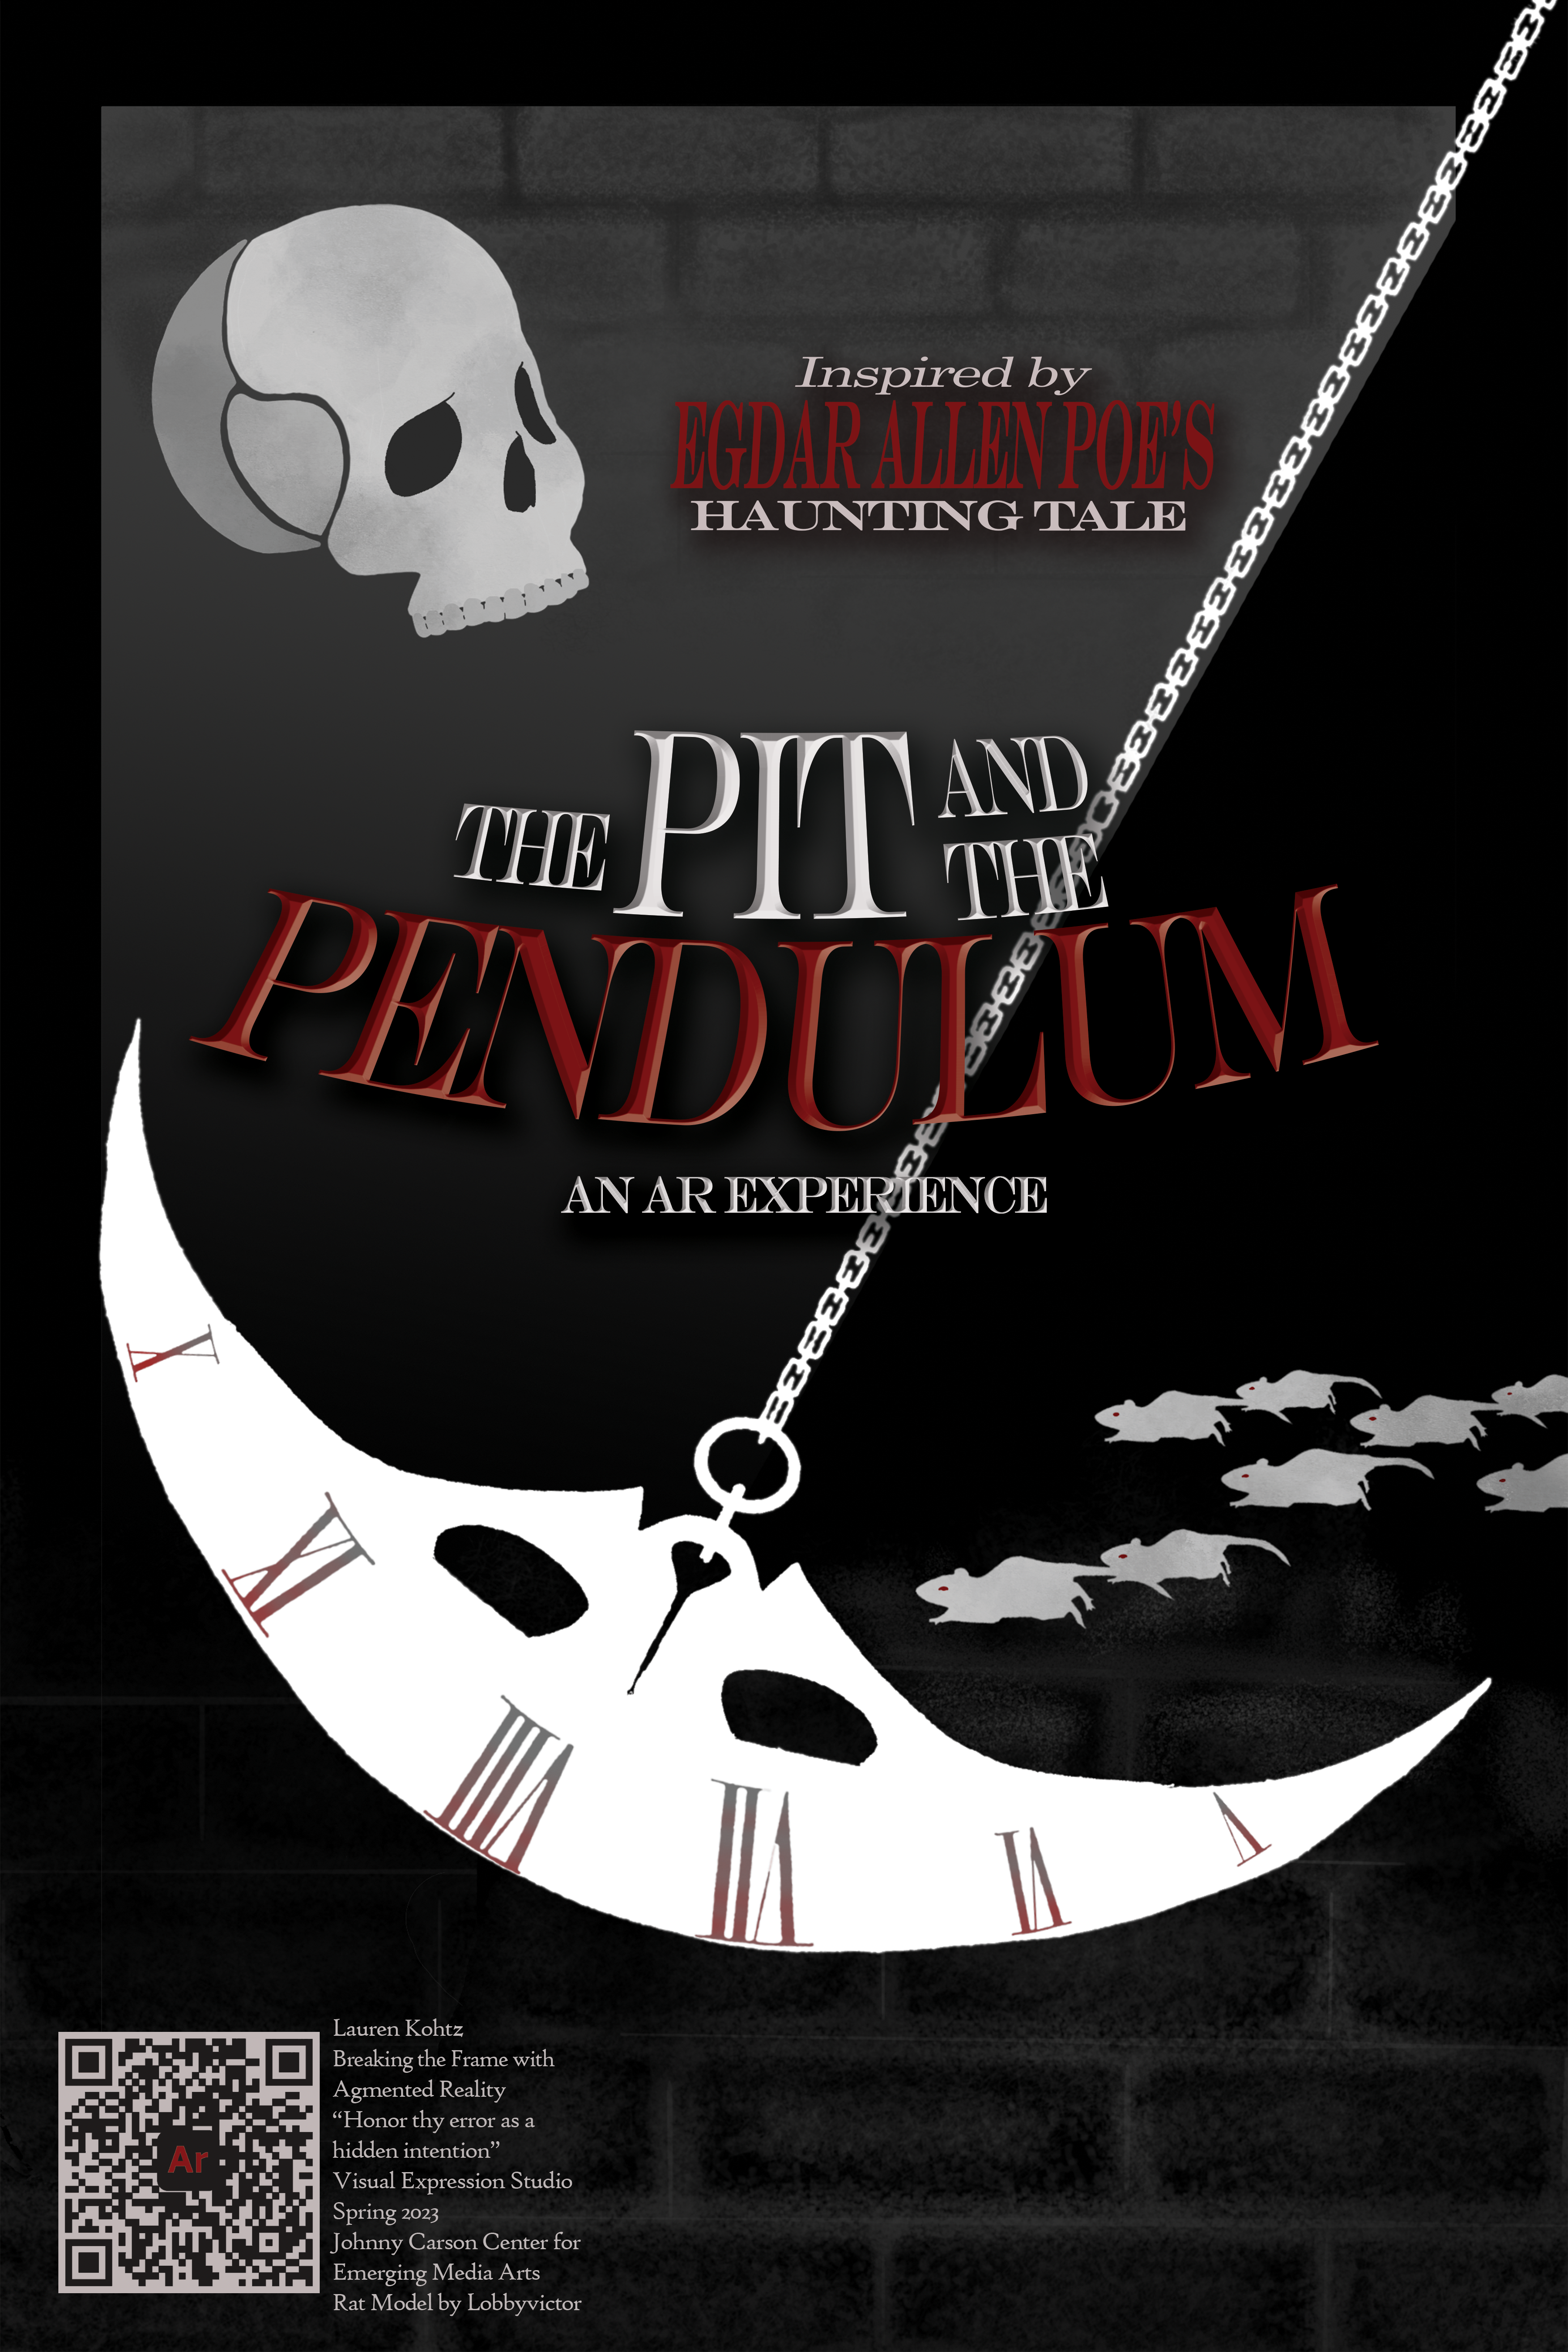 Edgar Allen Poe's: The Pit and the Pendulum AR experience poster